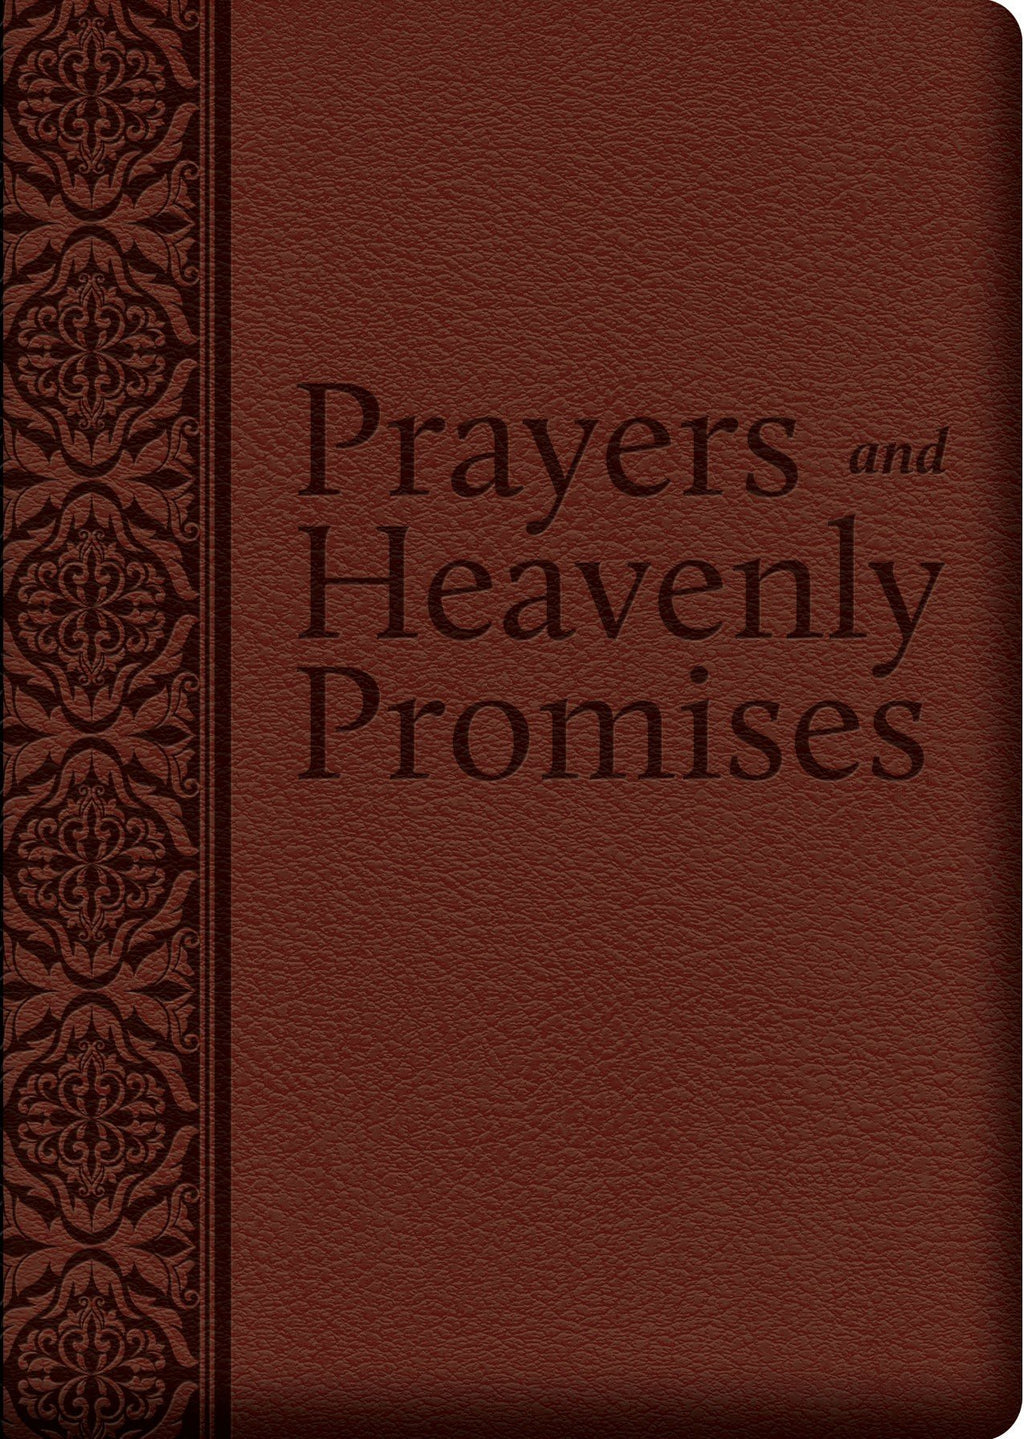 Prayers and Heavenly Promises Ultra Soft (Gift Edition) - Unique Catholic Gifts